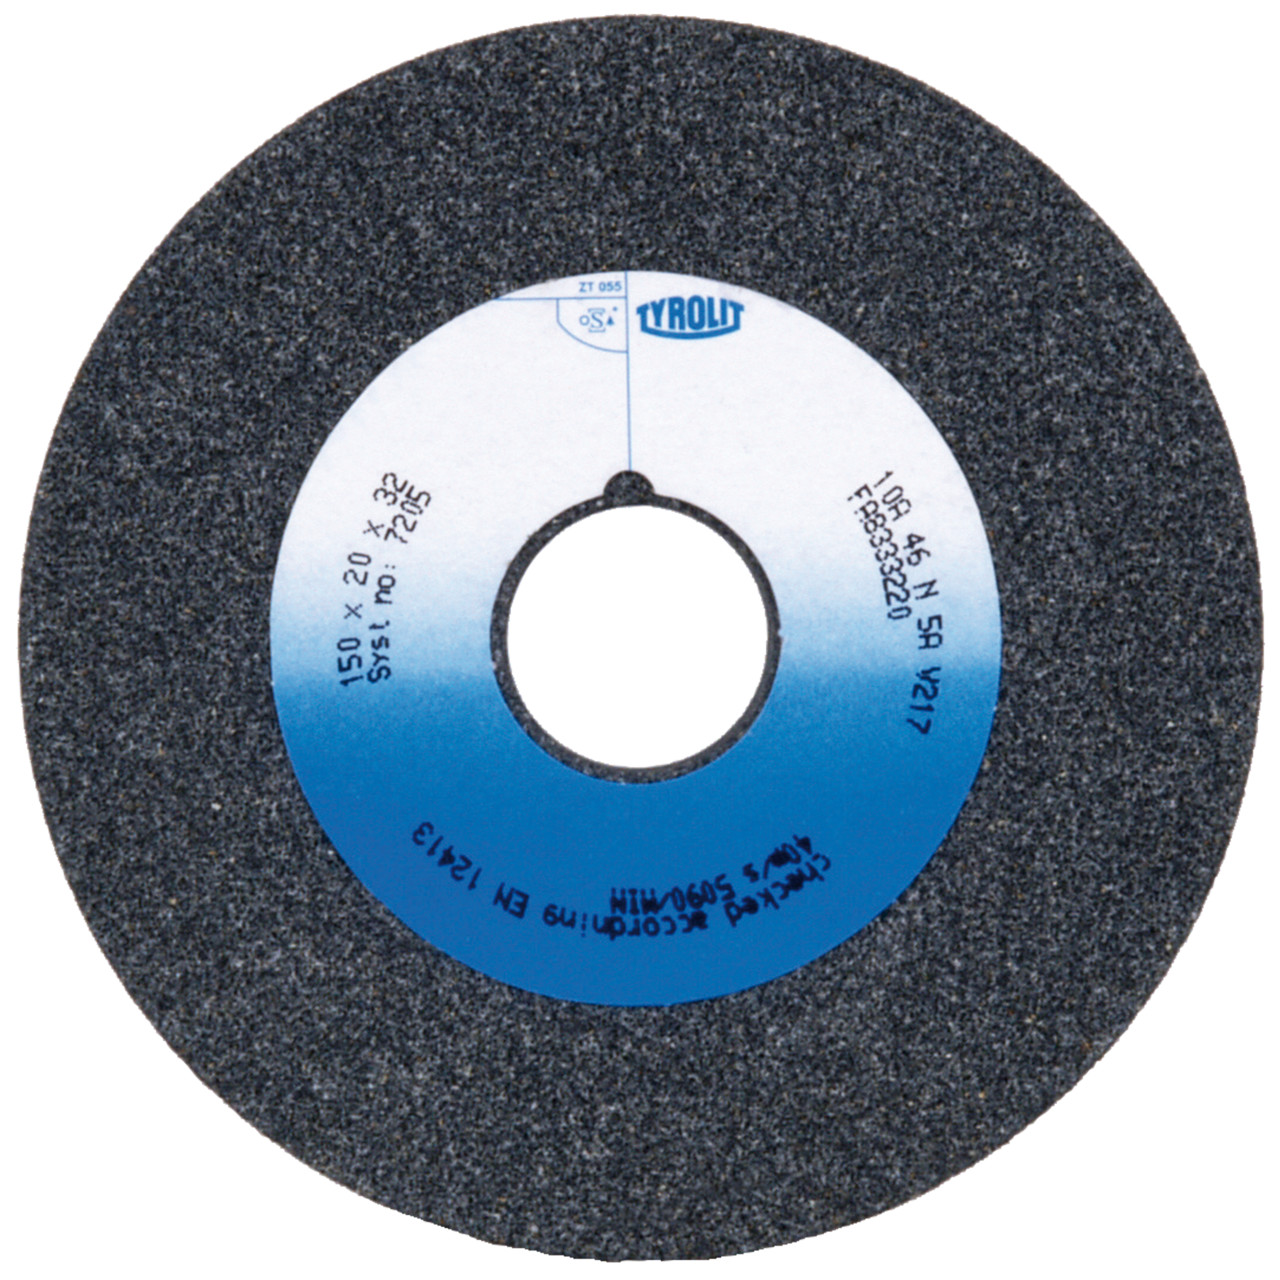 TYROLIT conventional ceramic grinding wheels DxDxH 250x32x51 For unalloyed and low-alloy steels, shape: 1, Art. 737812